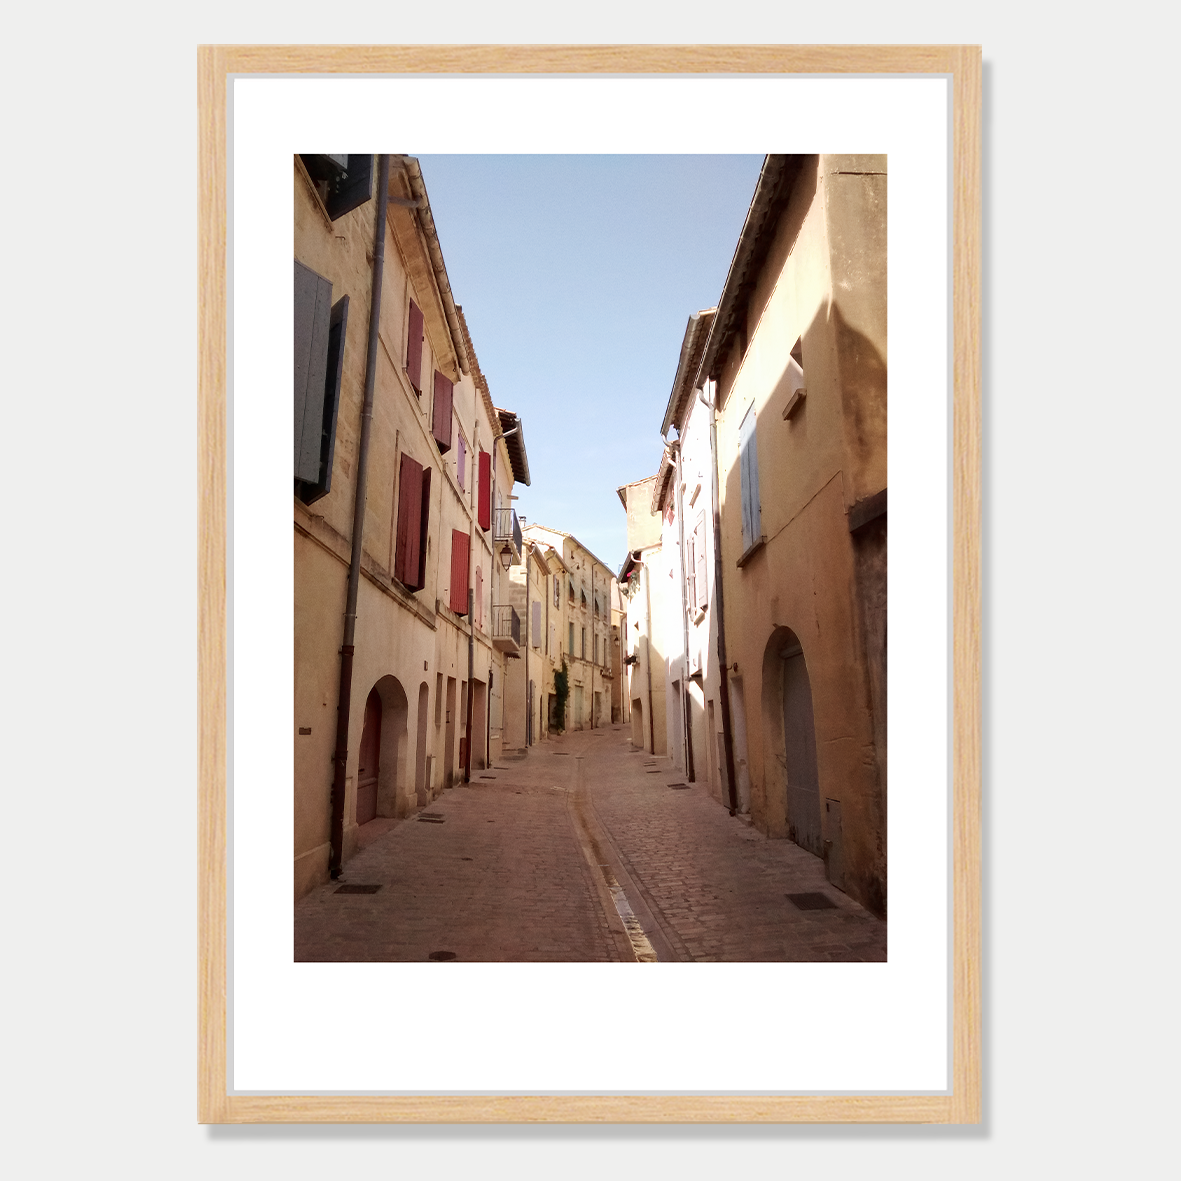 Looking down an Empty Street in Uzes, a small town in France Photographic Art Print in a Skinny Raw Wood Frame